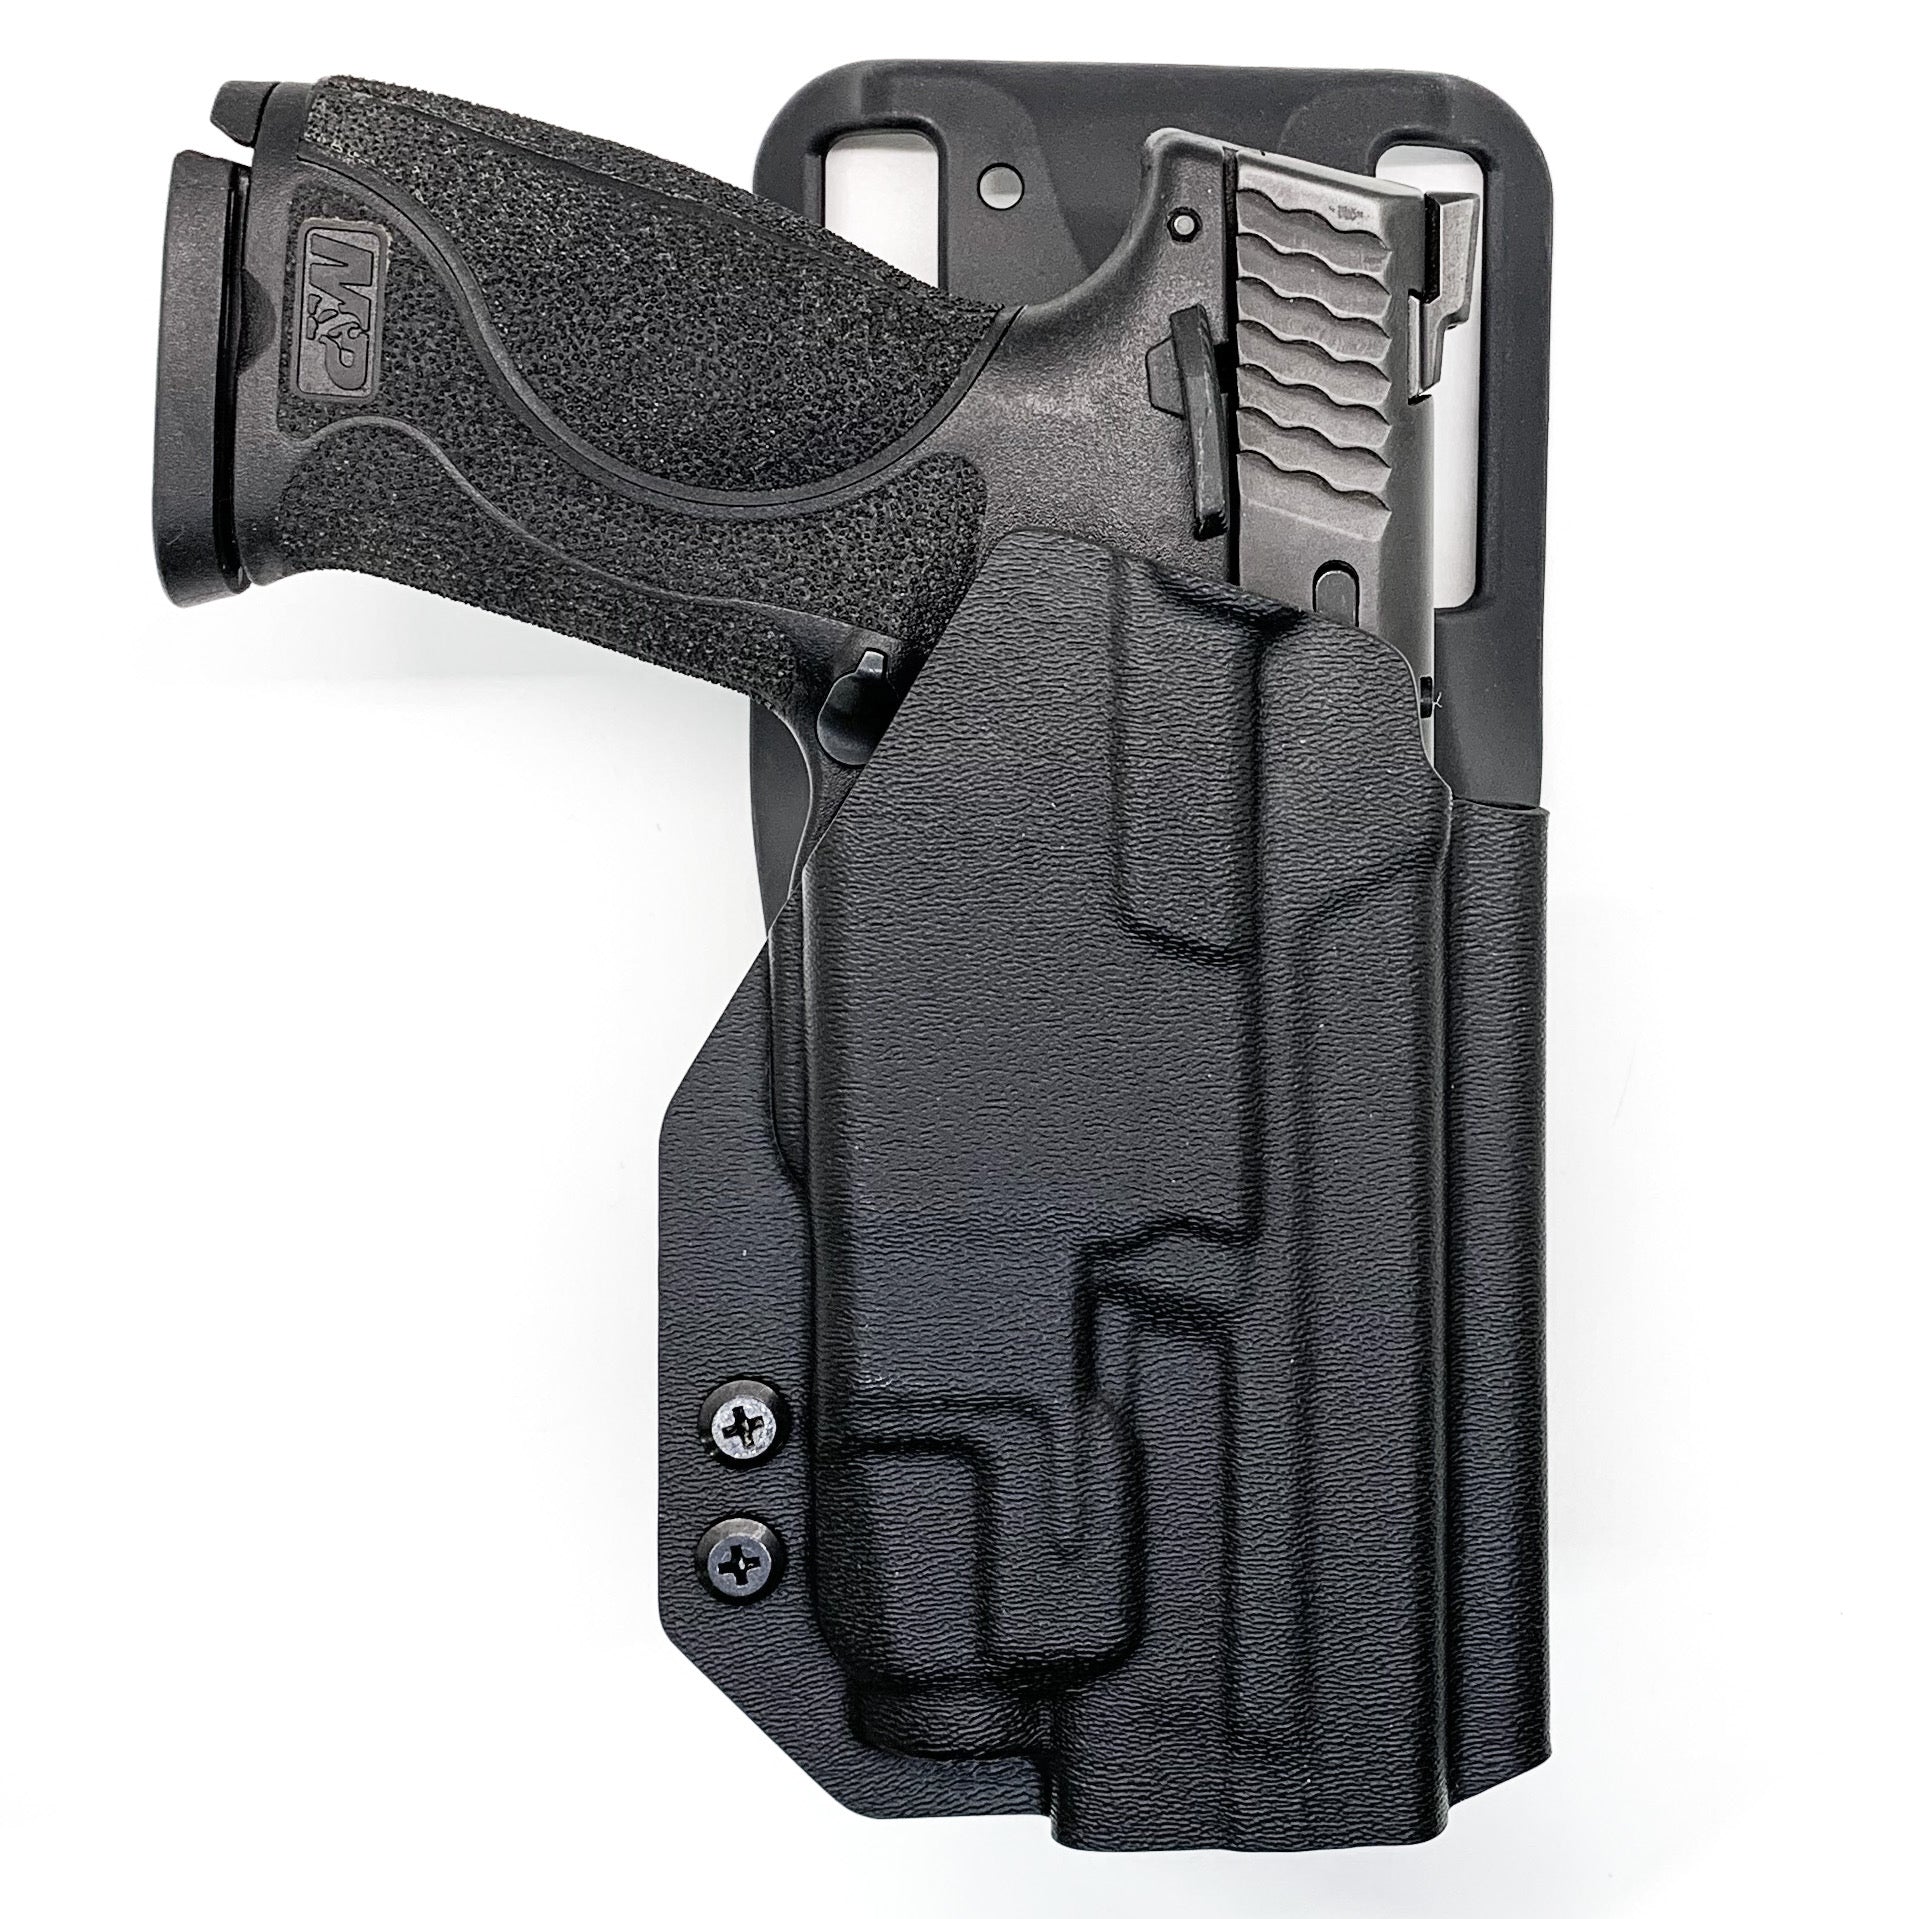 For the best Outside Waistband Kydex Duty & Competition Holster for the Smith and Wesson M&P 4" 10MM M2.0 pistol with thumb safety and Streamlight TLR-7, TLR-7A or TLR-7X shop Four Brothers Holsters.  Full sweat guard, adjustable retention, cleared for red dot sights. Made in the USA for veterans and law enforcement.